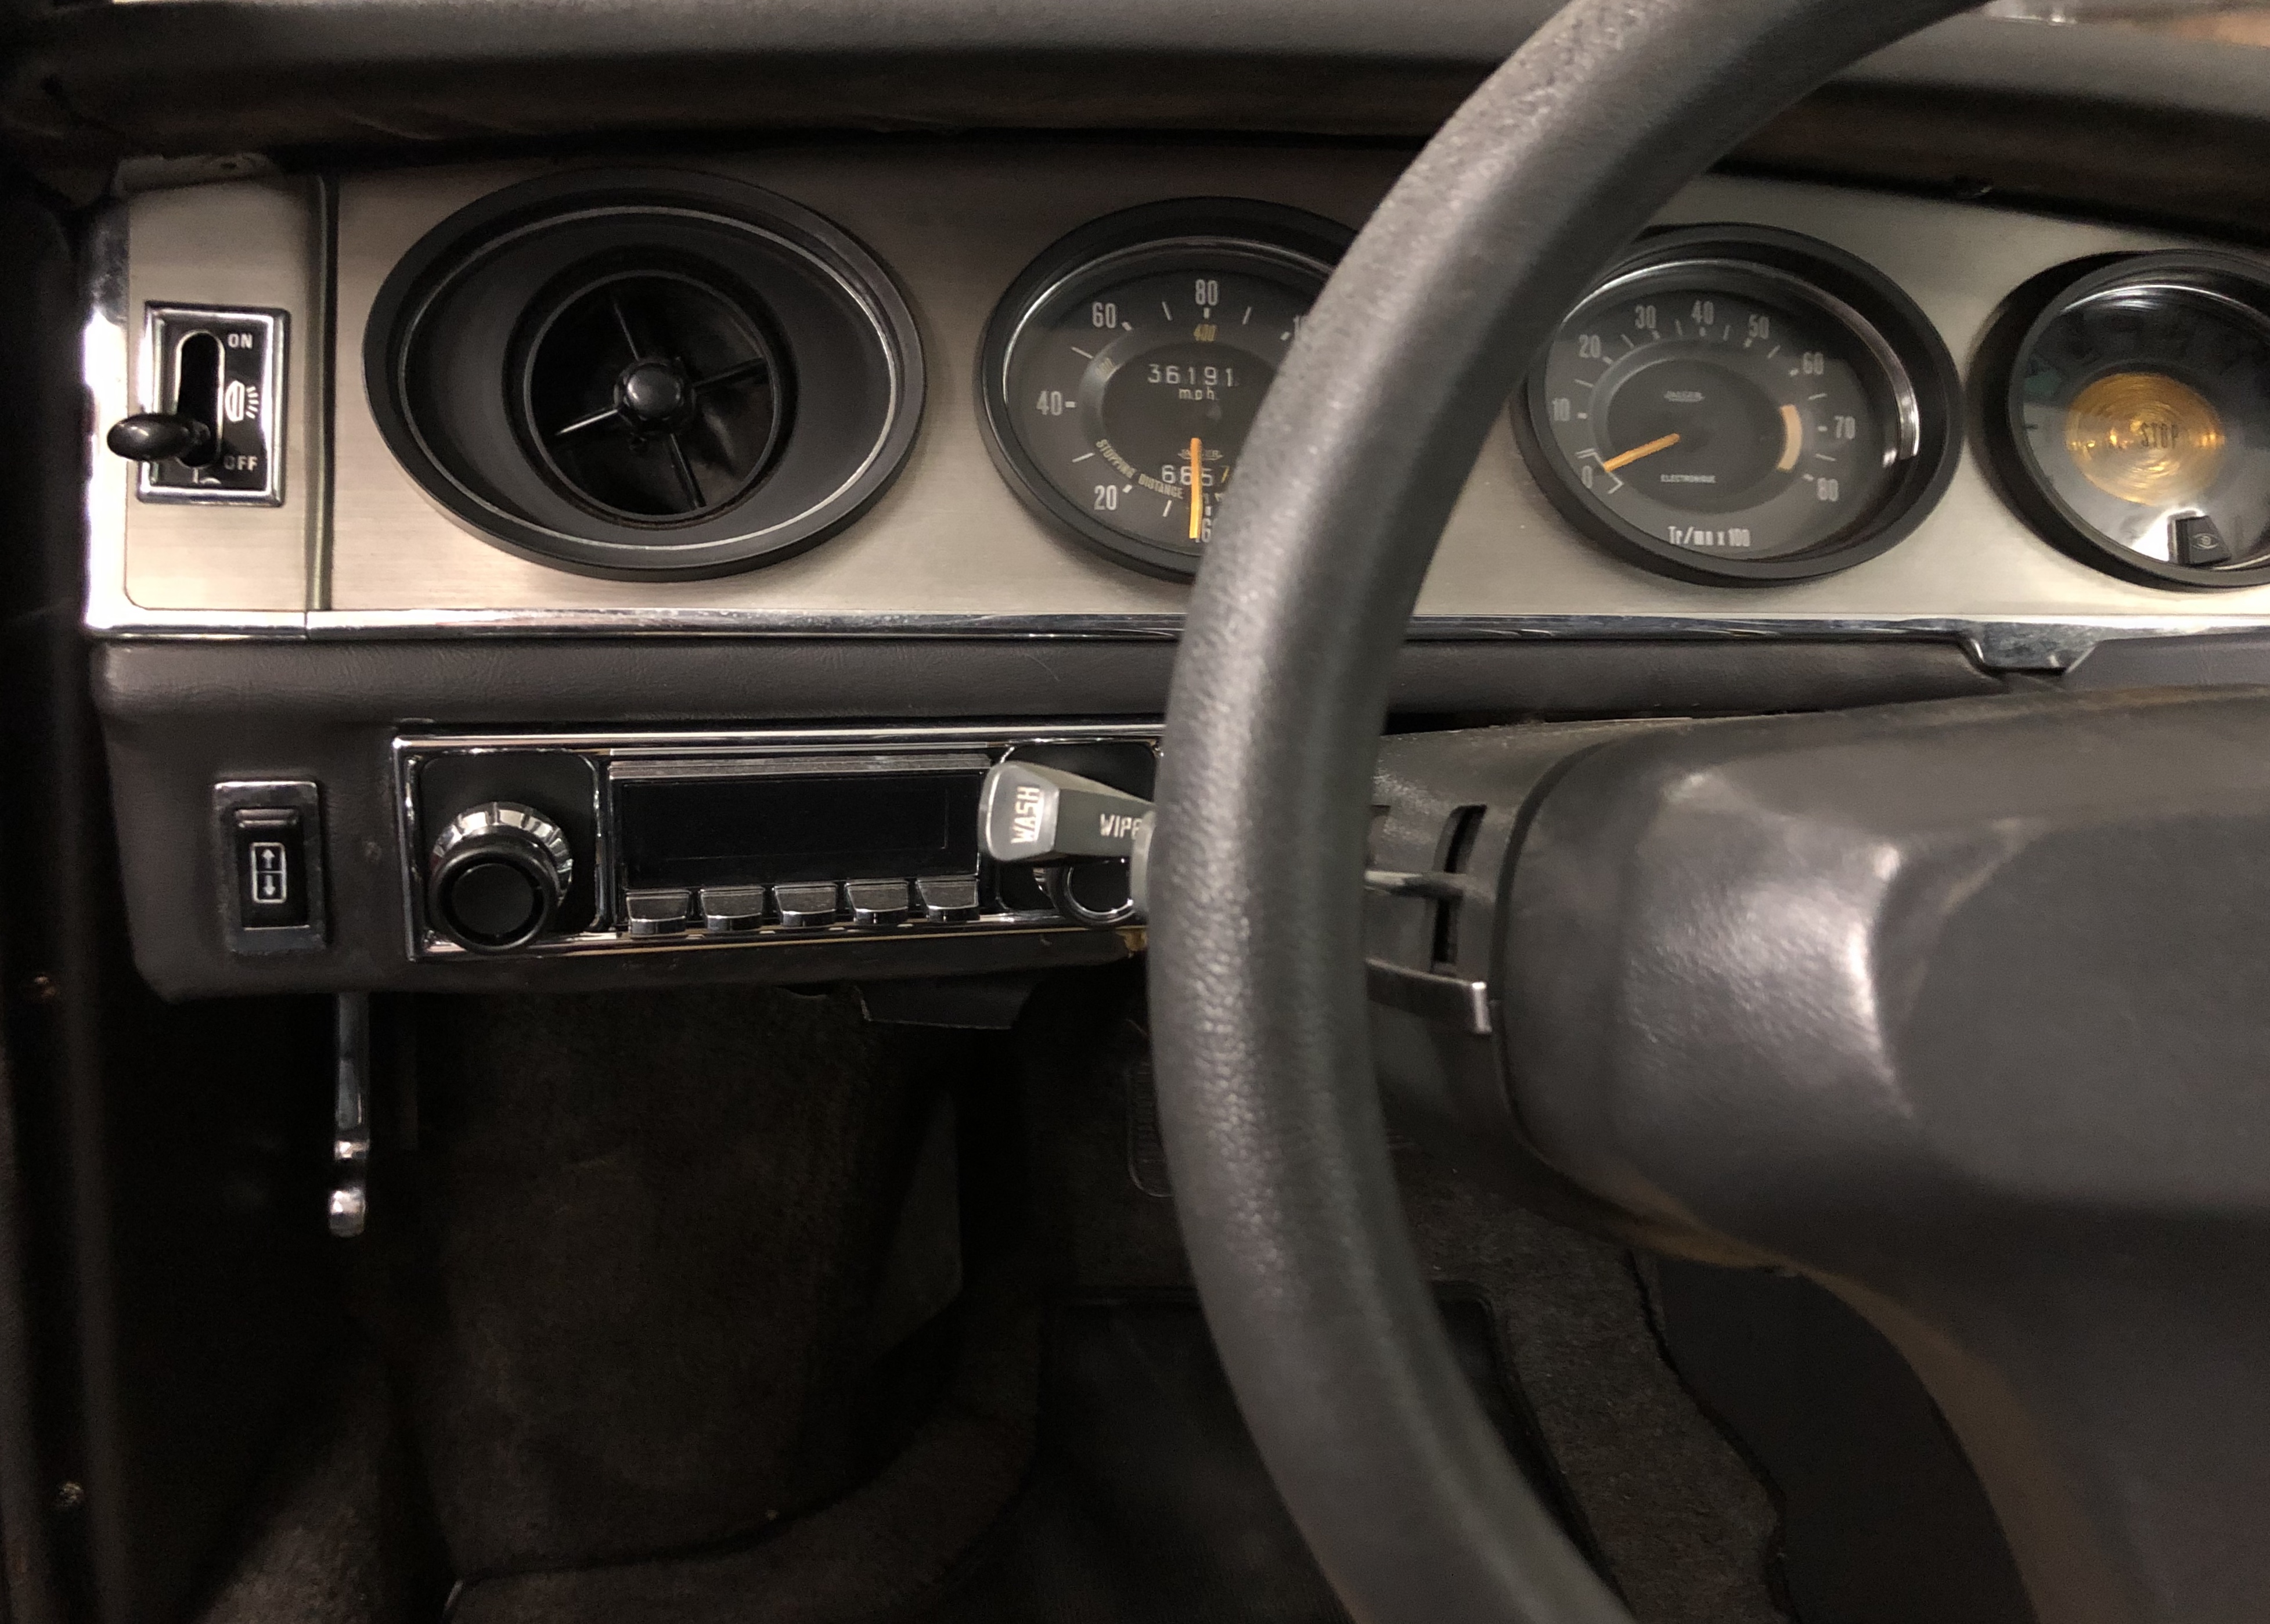 The Variety of Radios Citroën Fitted in the SM﻿ - Citroënvie!